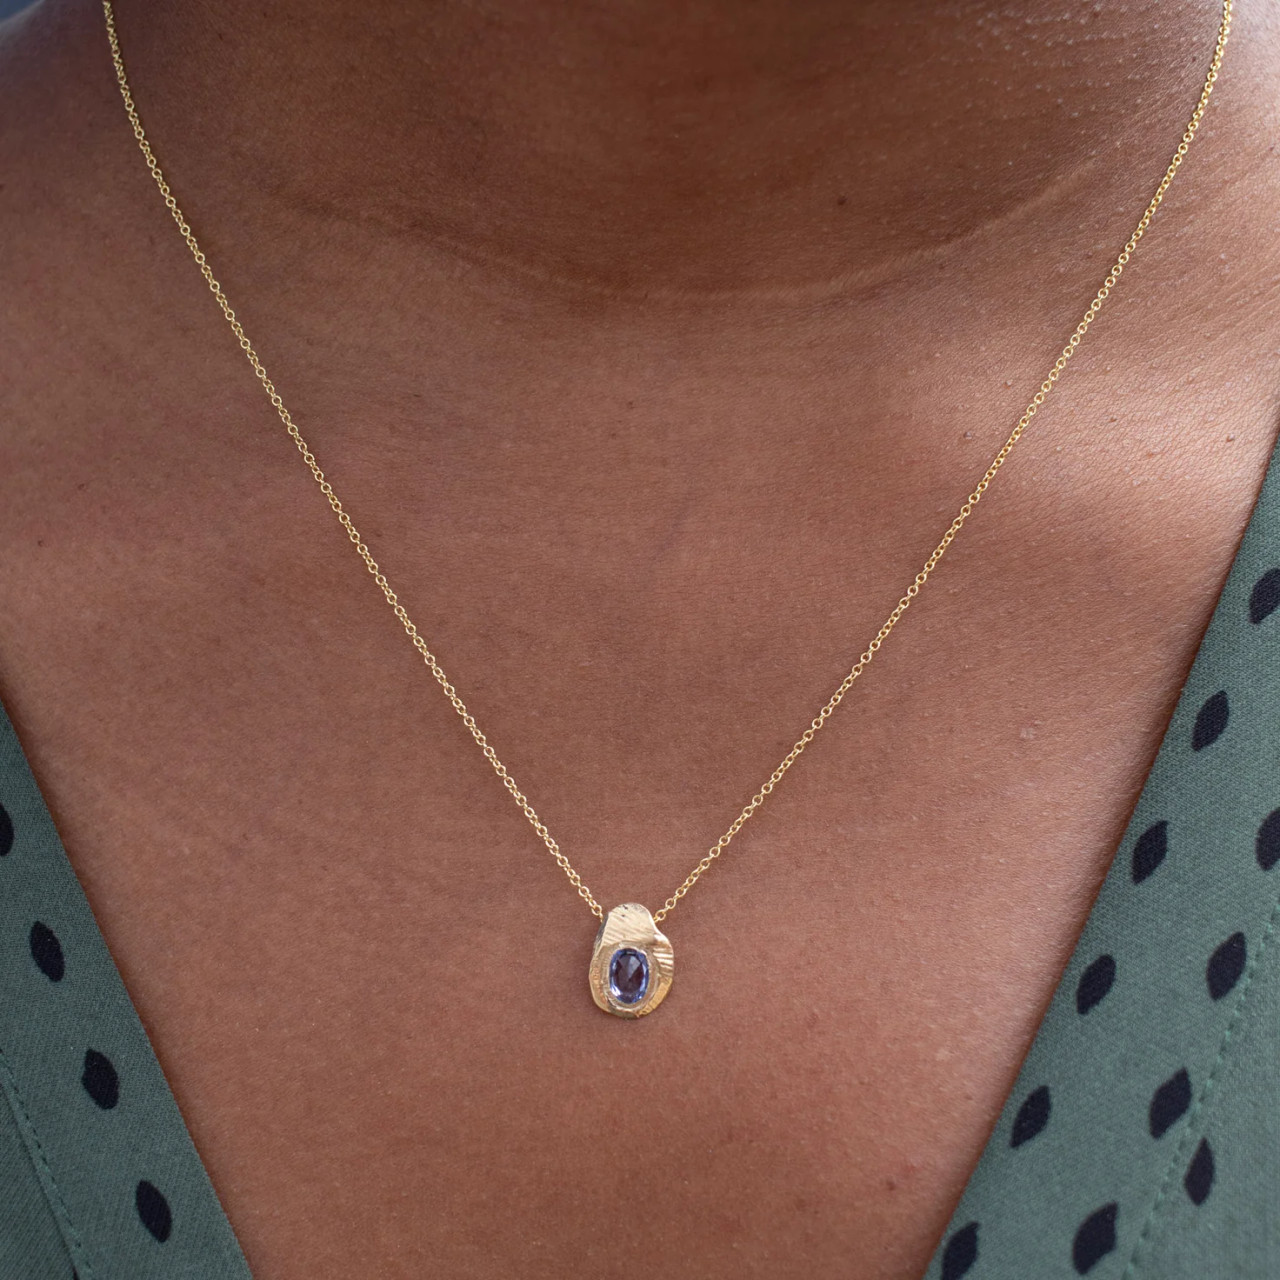 Oval Slider Necklace in Light Blue Sapphire, Page Sargisson, tomfoolery